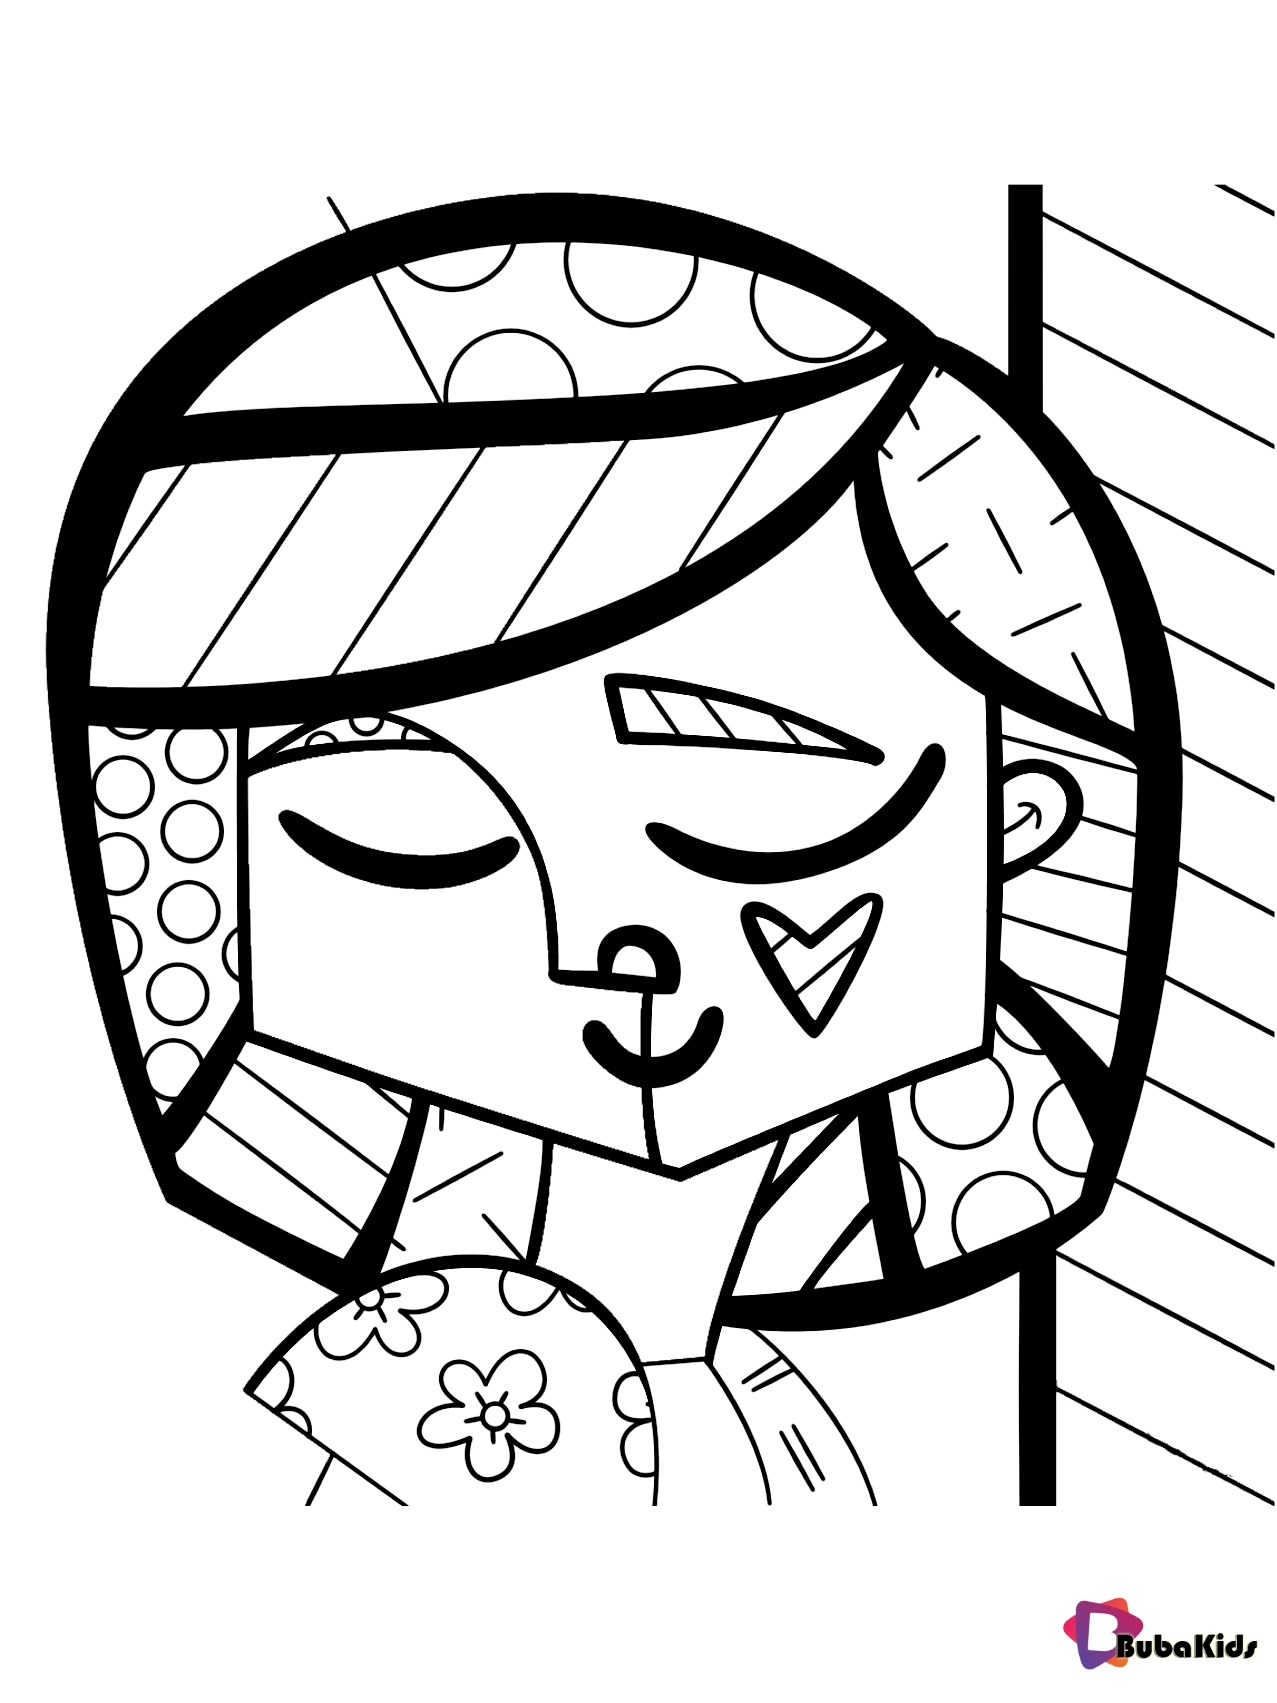 Good girl picture by Romero Britto coloring page Wallpaper